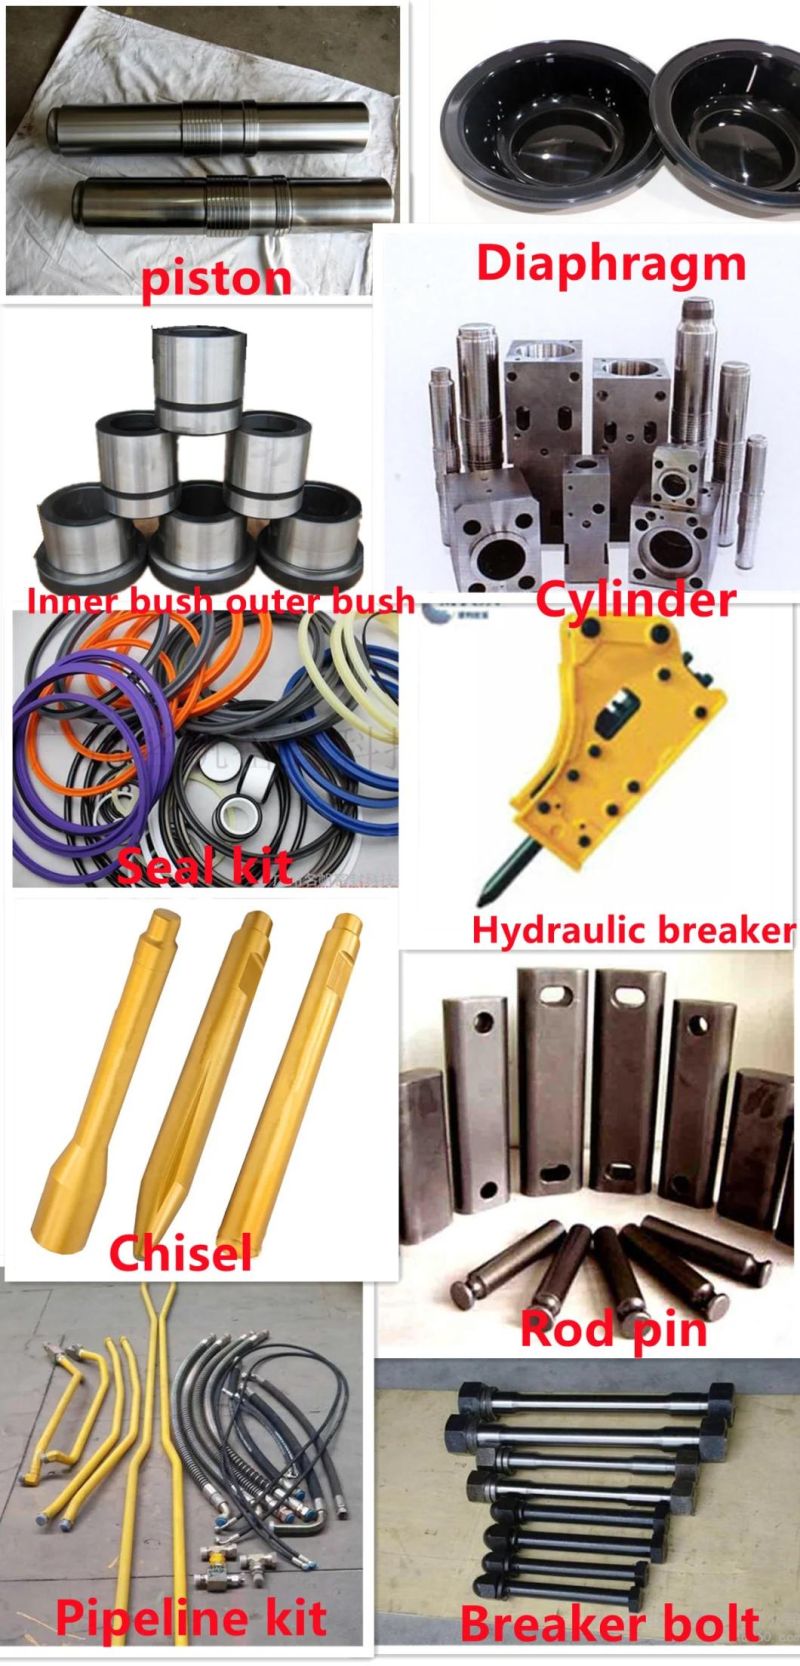 Indeco/Atlas/Mkb/Blt/Sandvik/Jcb Various Specifications Related Supporting Charge Kit Hydraulic Breaker Nitrogen Gas Kit